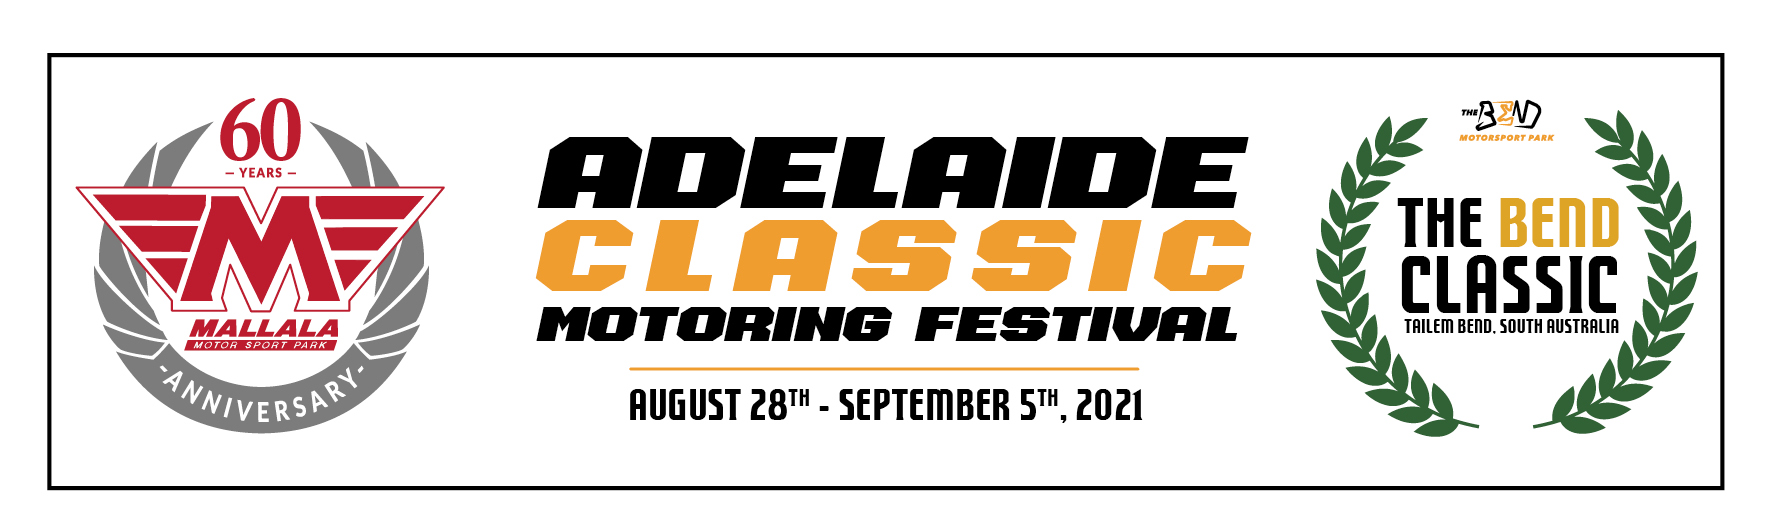 The Adelaide Classic 2021 | Media Registration Form